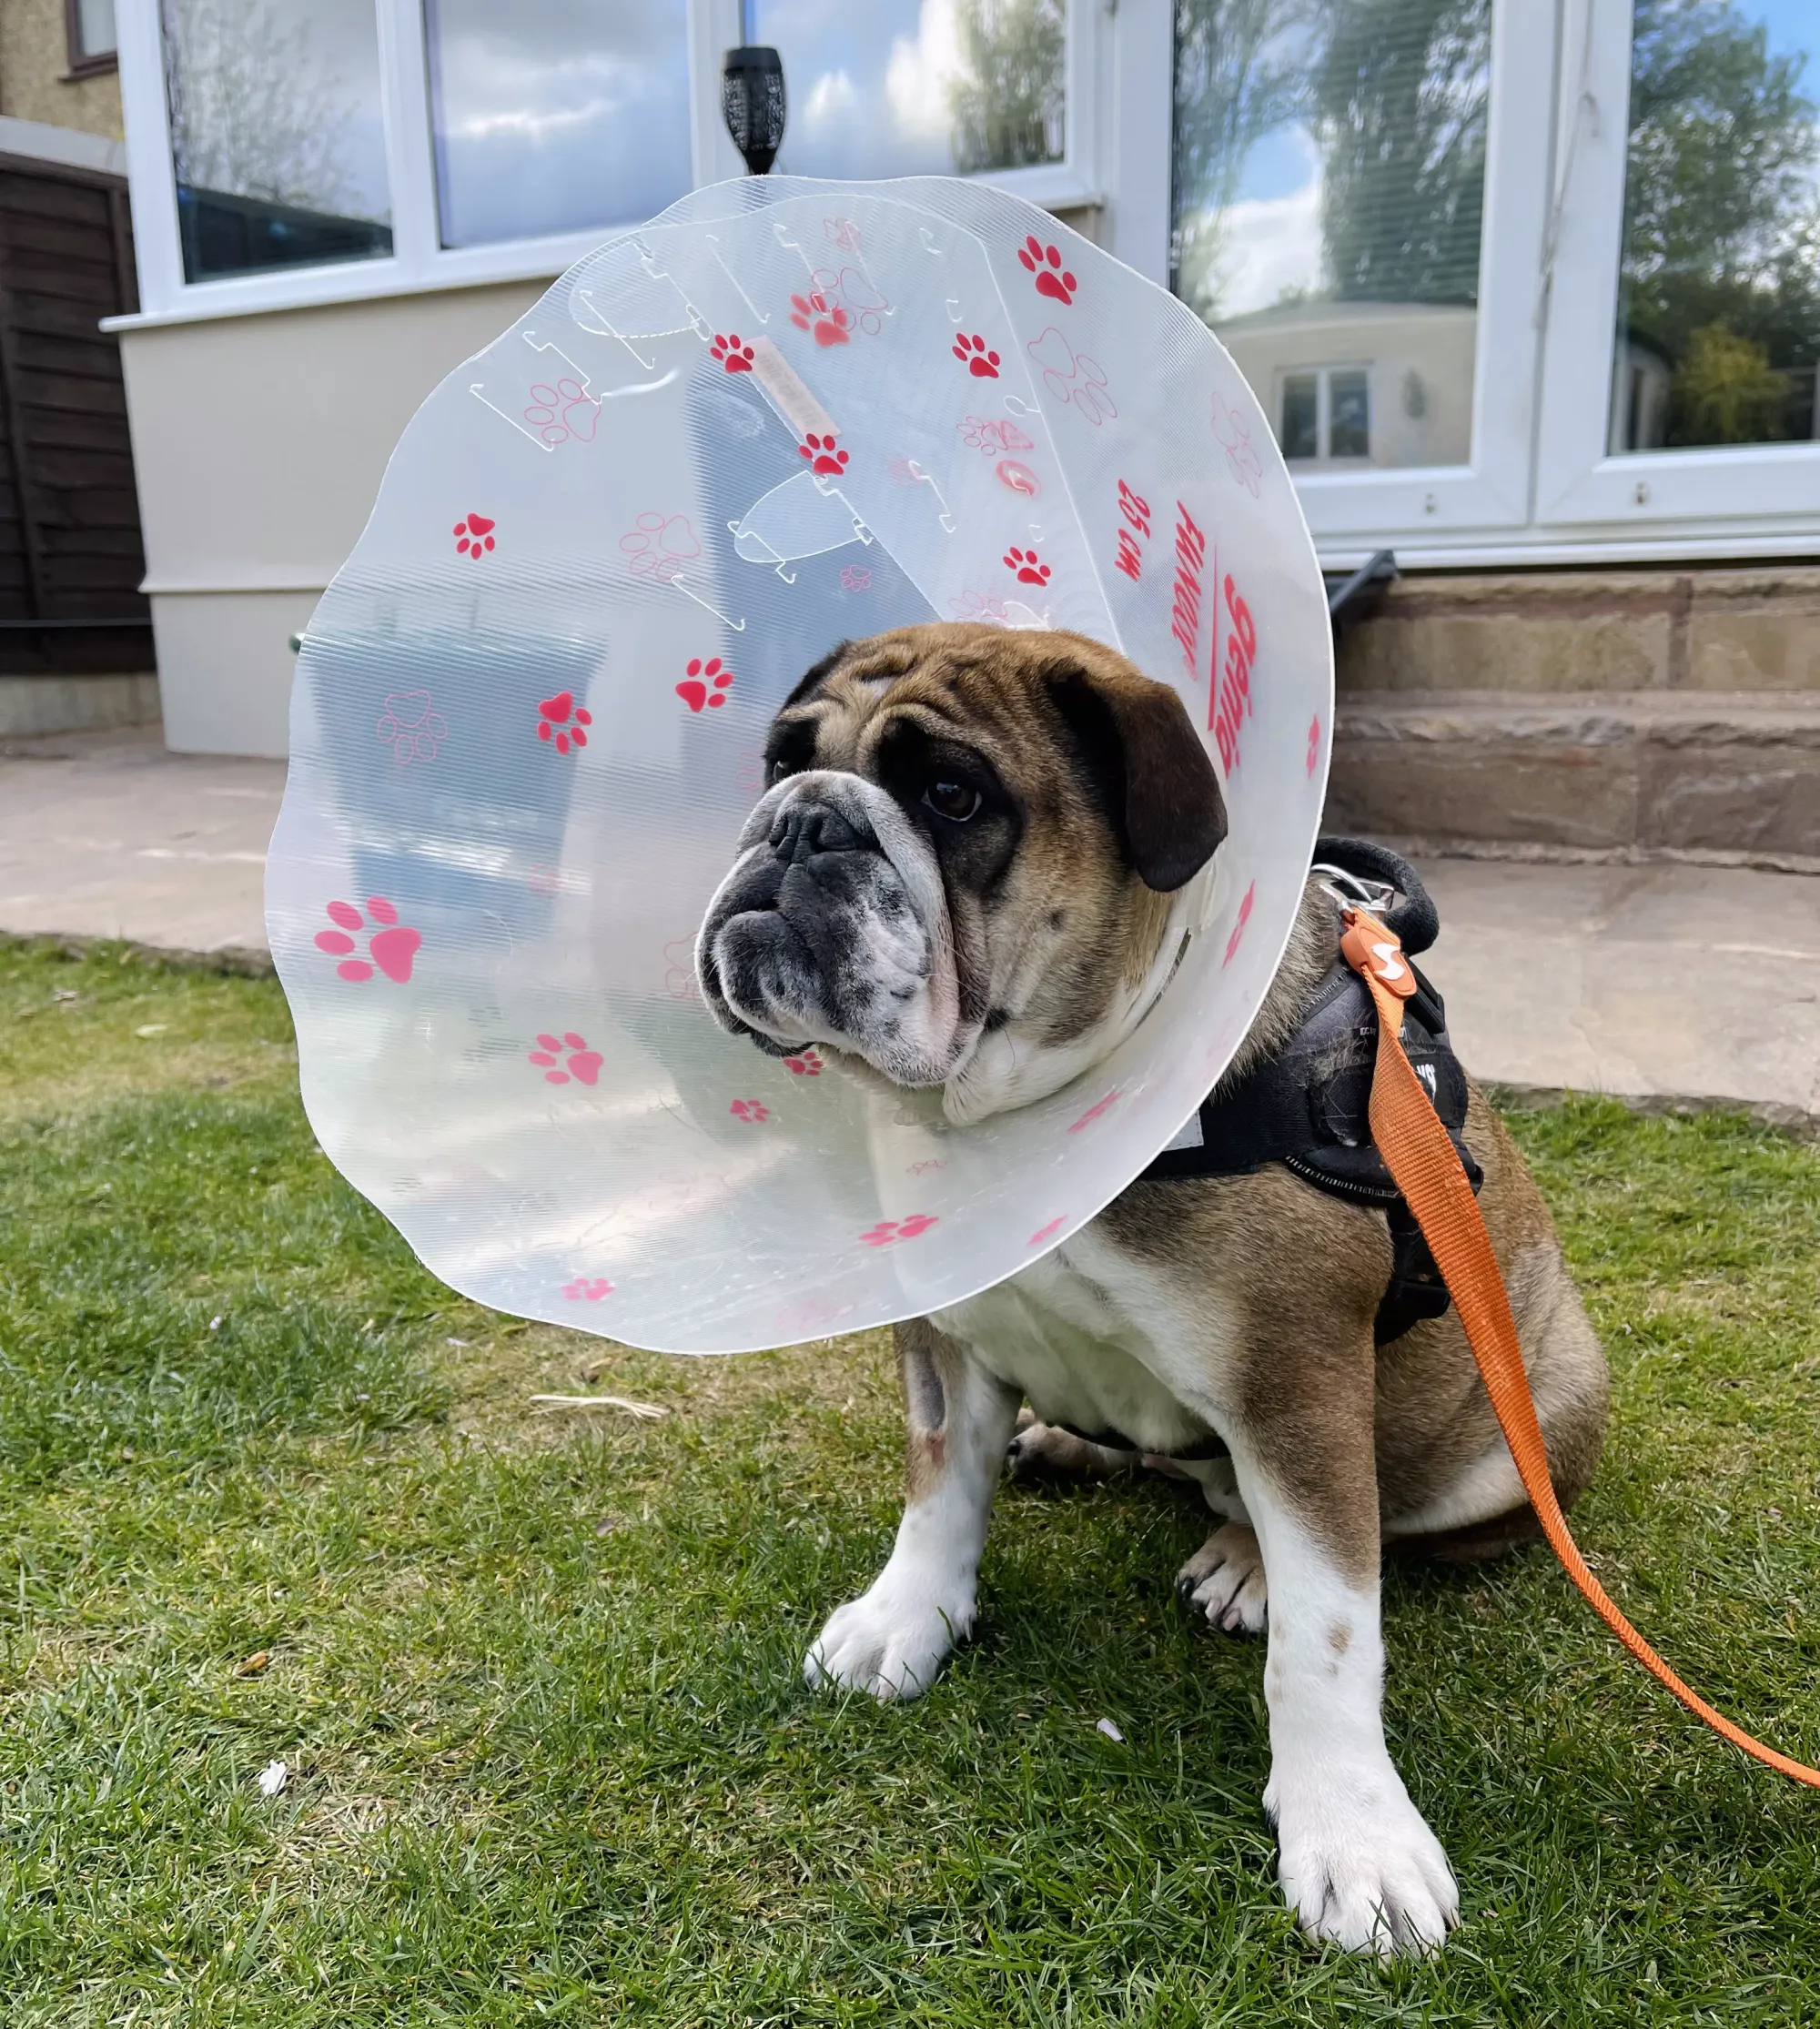 Luna (Bulldog) wearing the cone of shame - difference between spaying and neutering